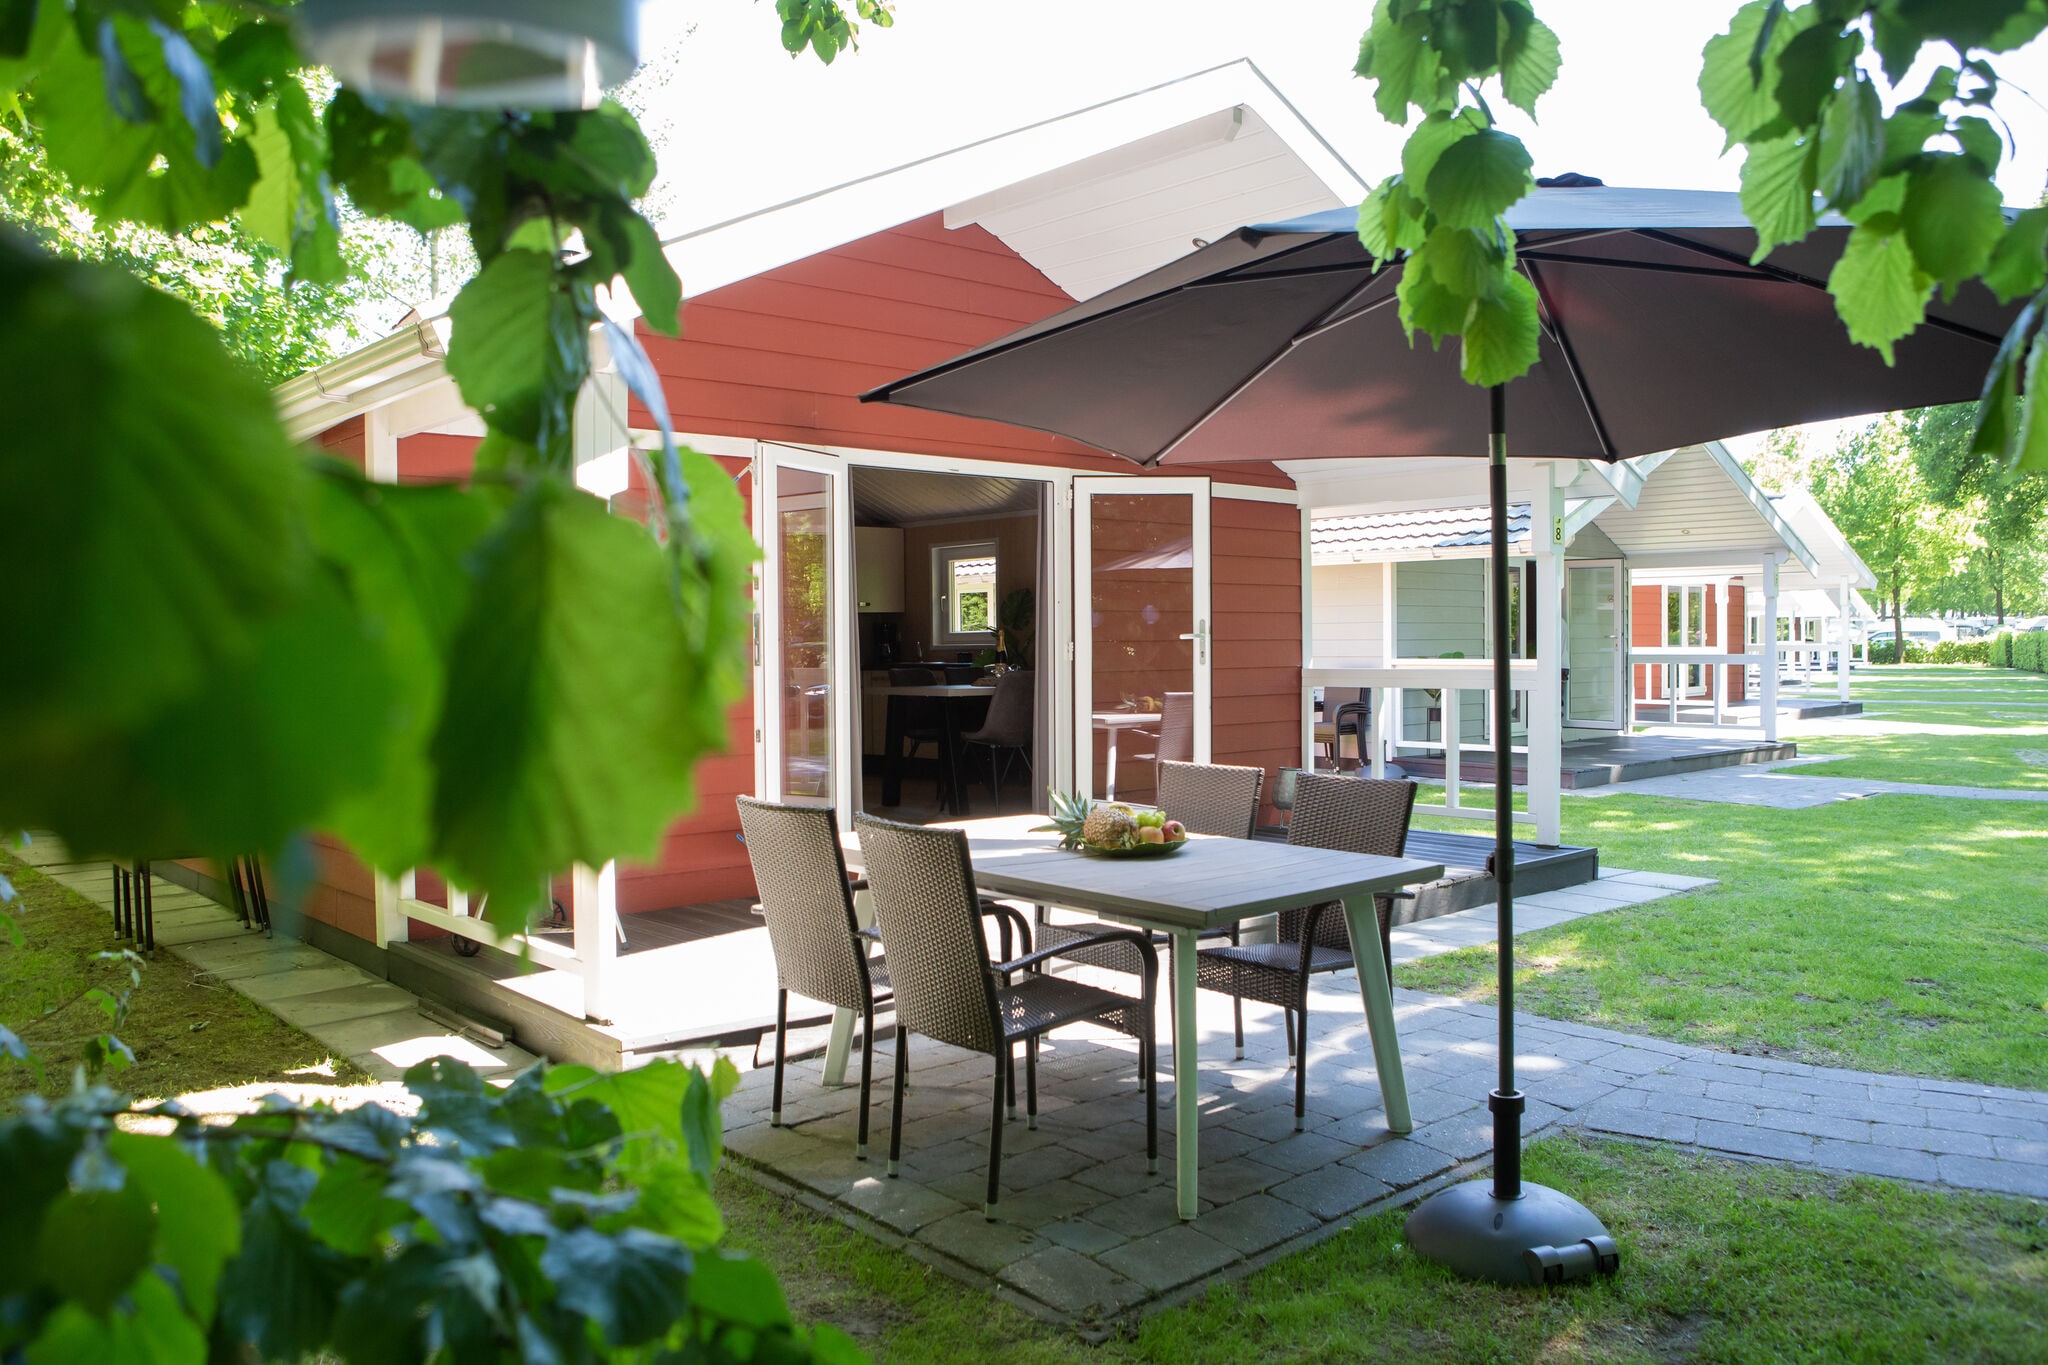 Beautiful lodge with a nice terrace, located in a holiday park in Brabant